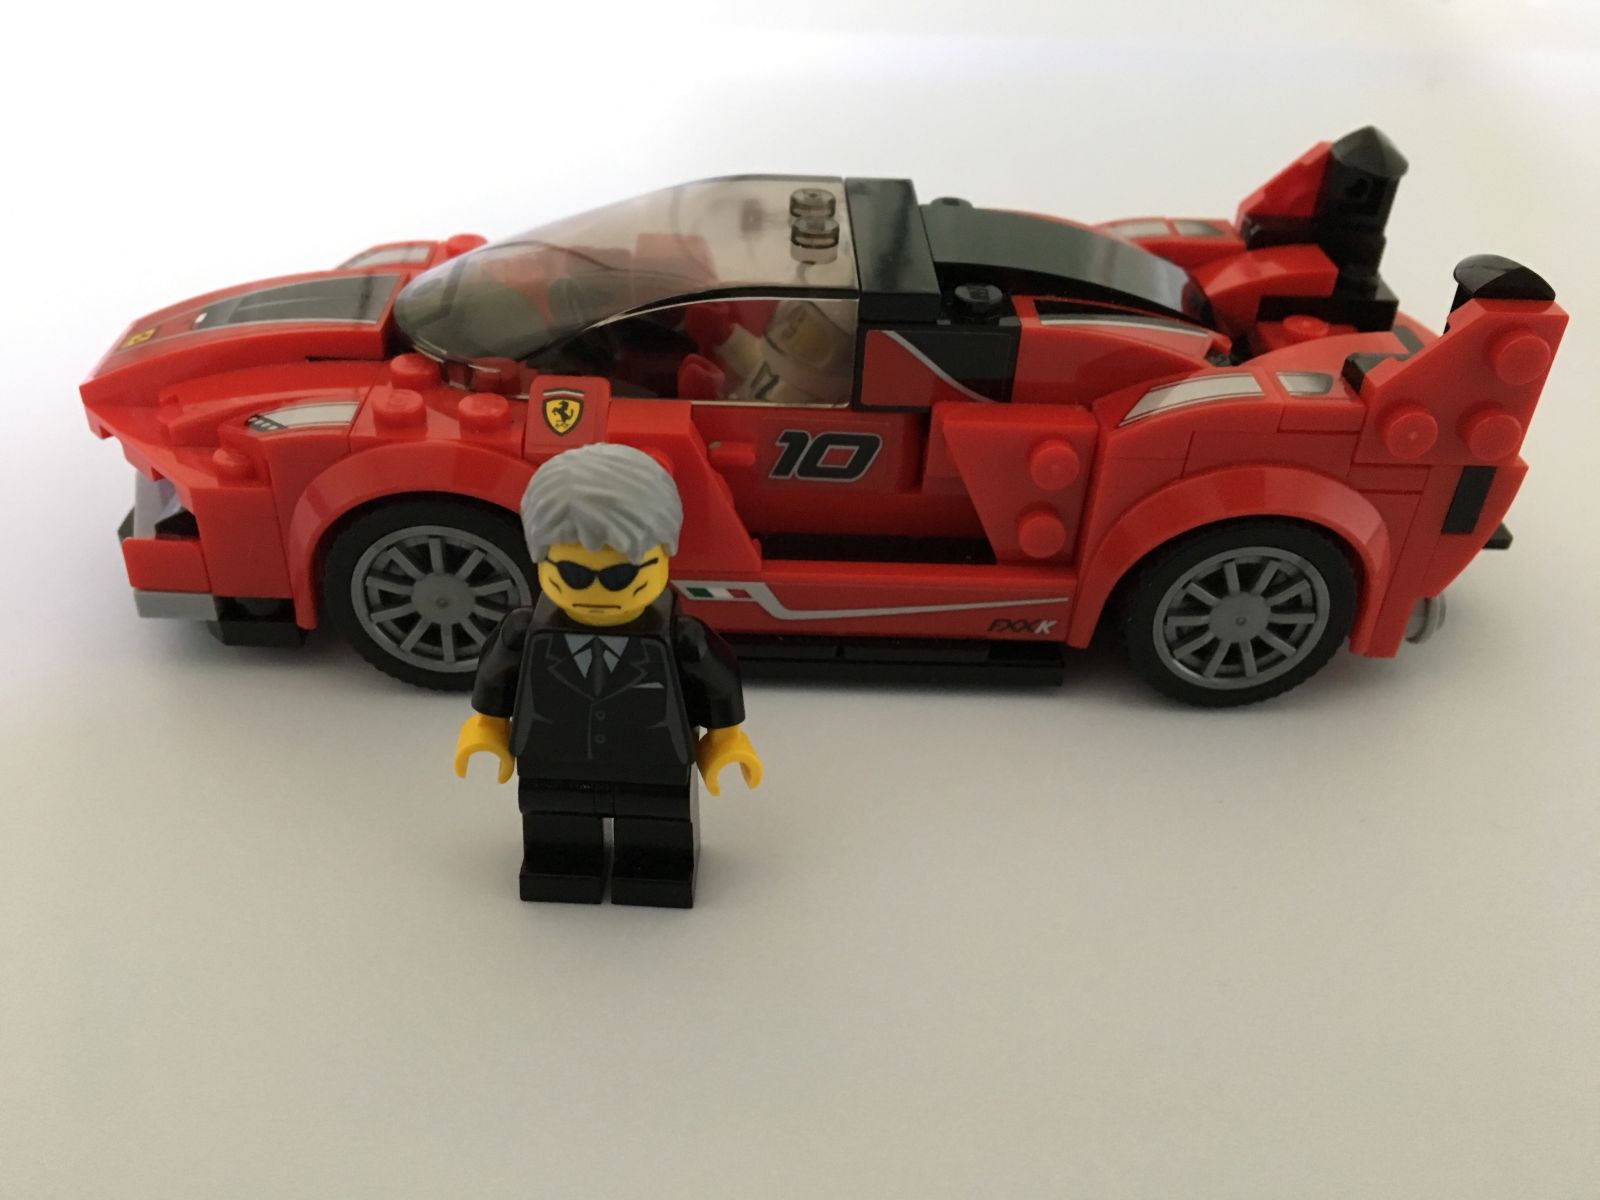 Illustration for article titled I made a minifigure that resembles Enzo Ferrari.